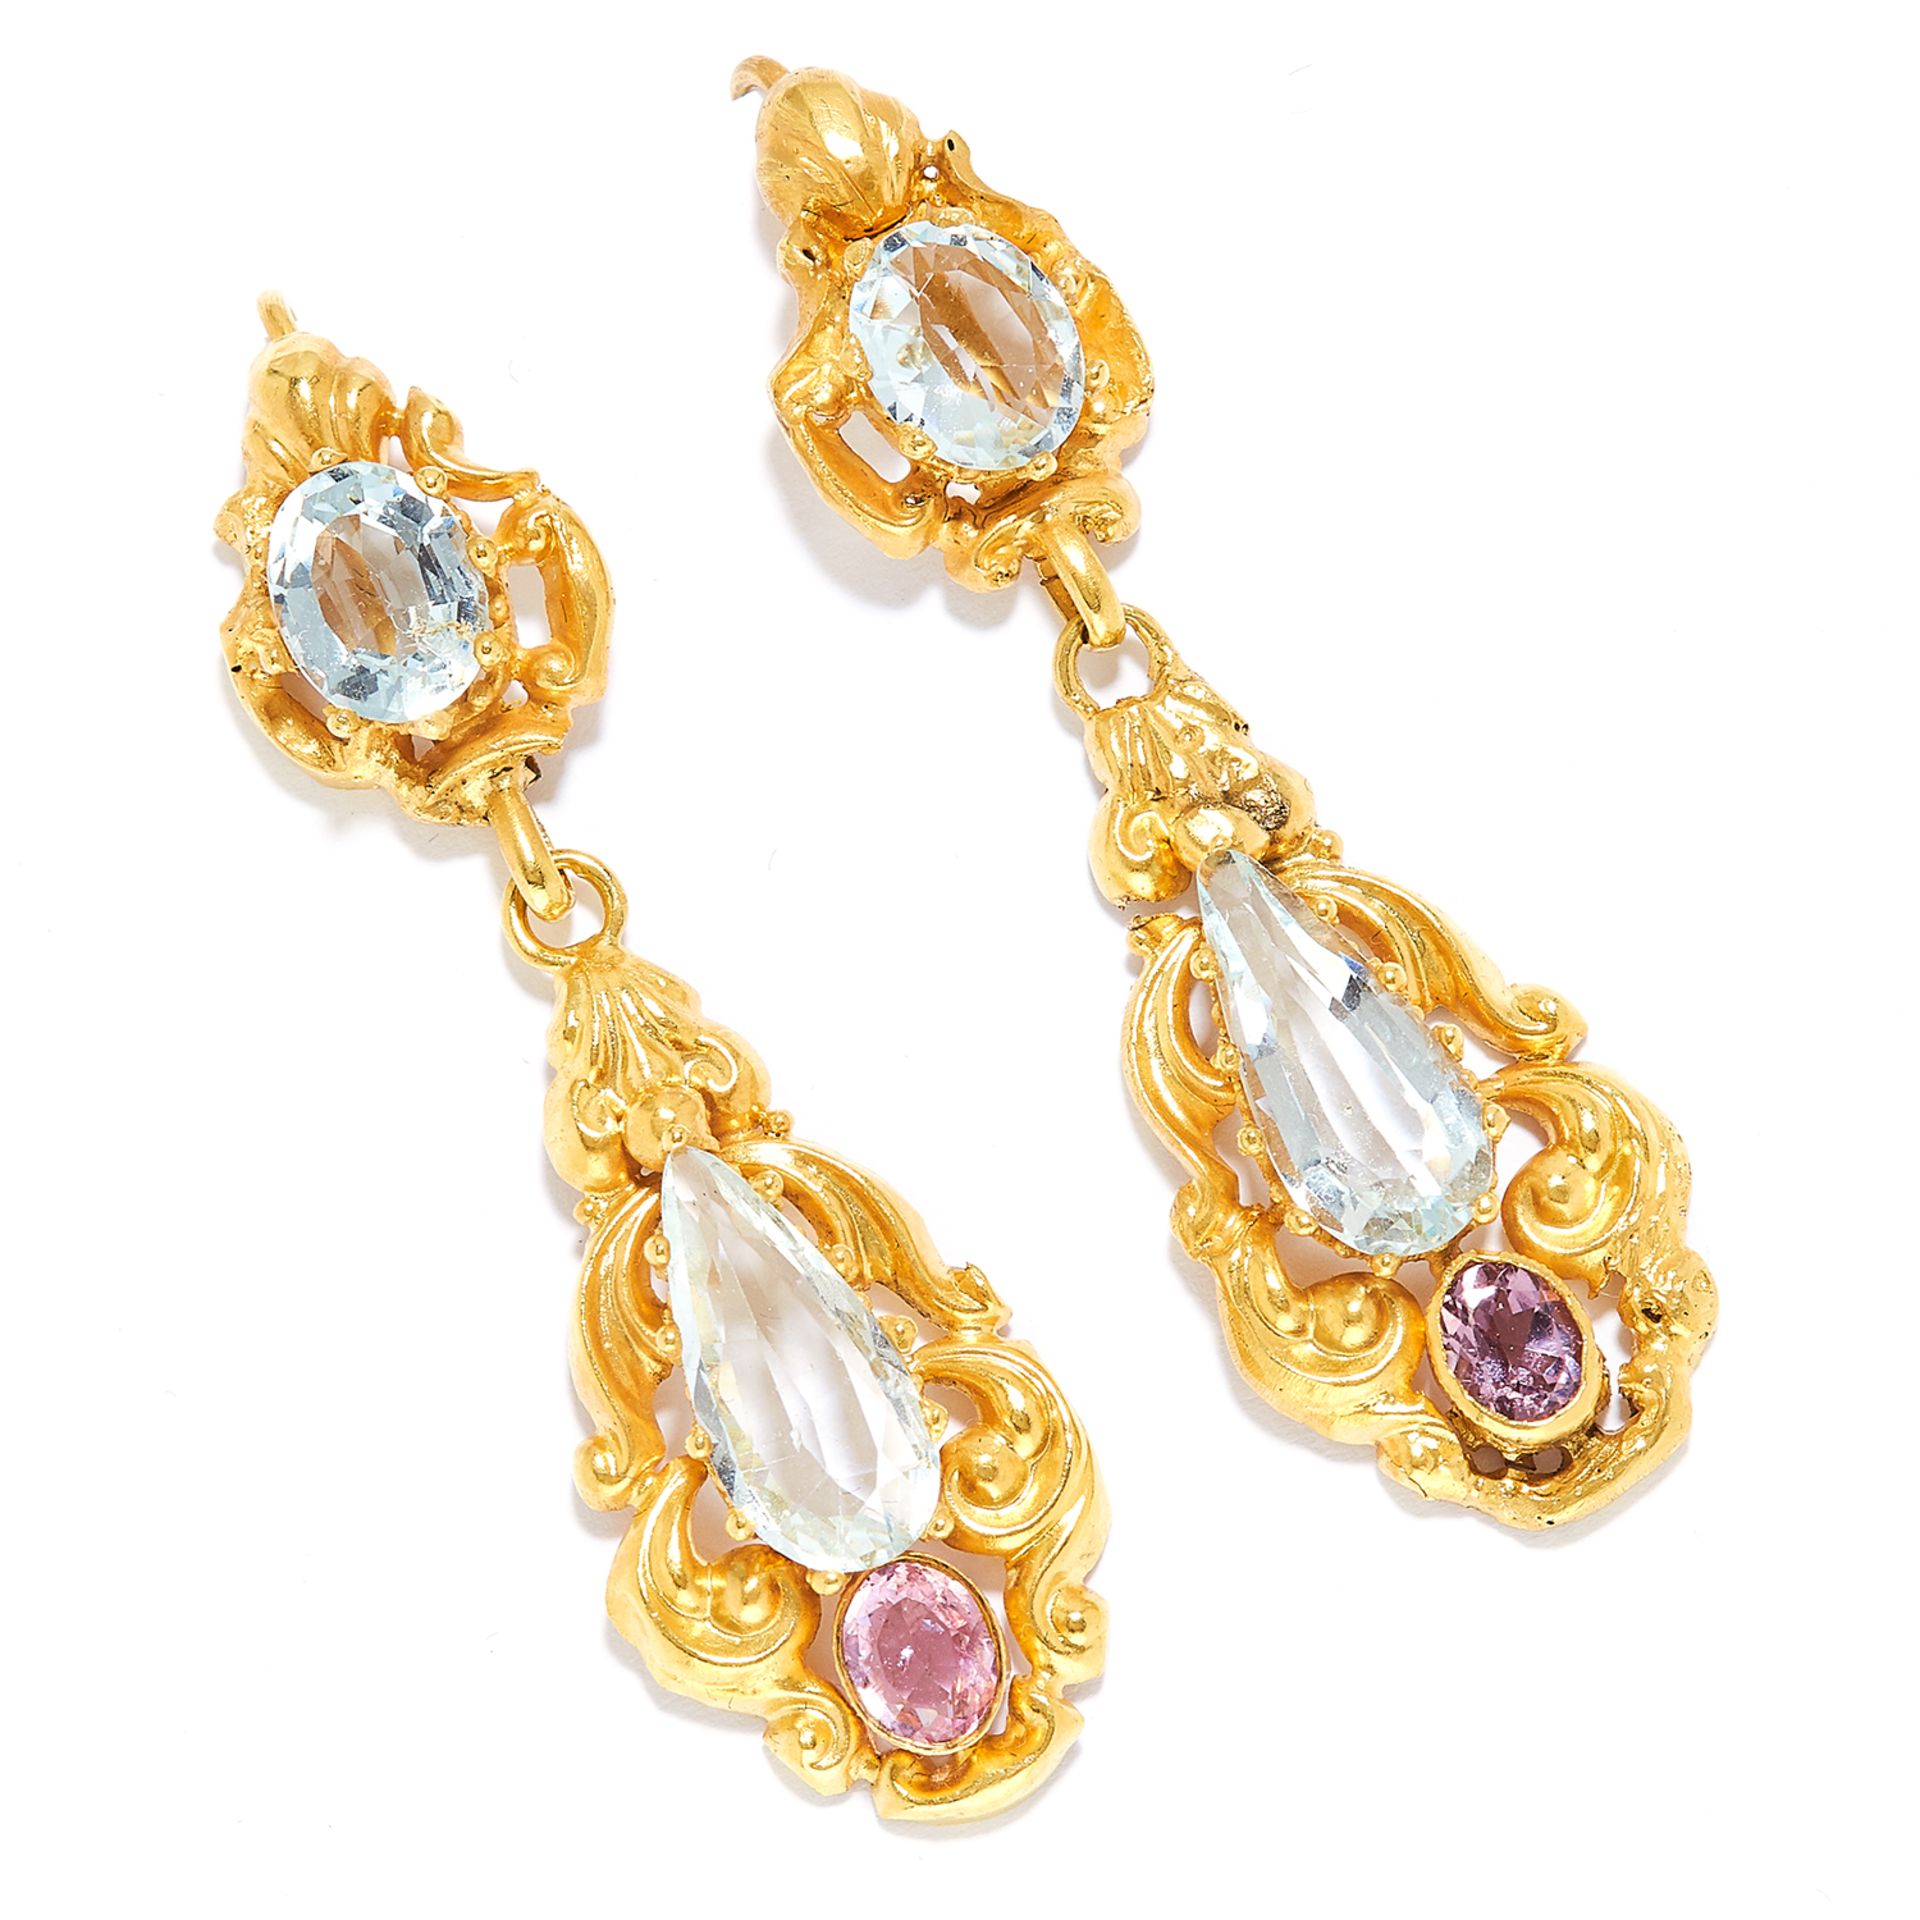 ANTIQUE AQUAMARINE AND PINK TOPAZ EARRINGS in high carat yellow gold, each set with an oval and pear